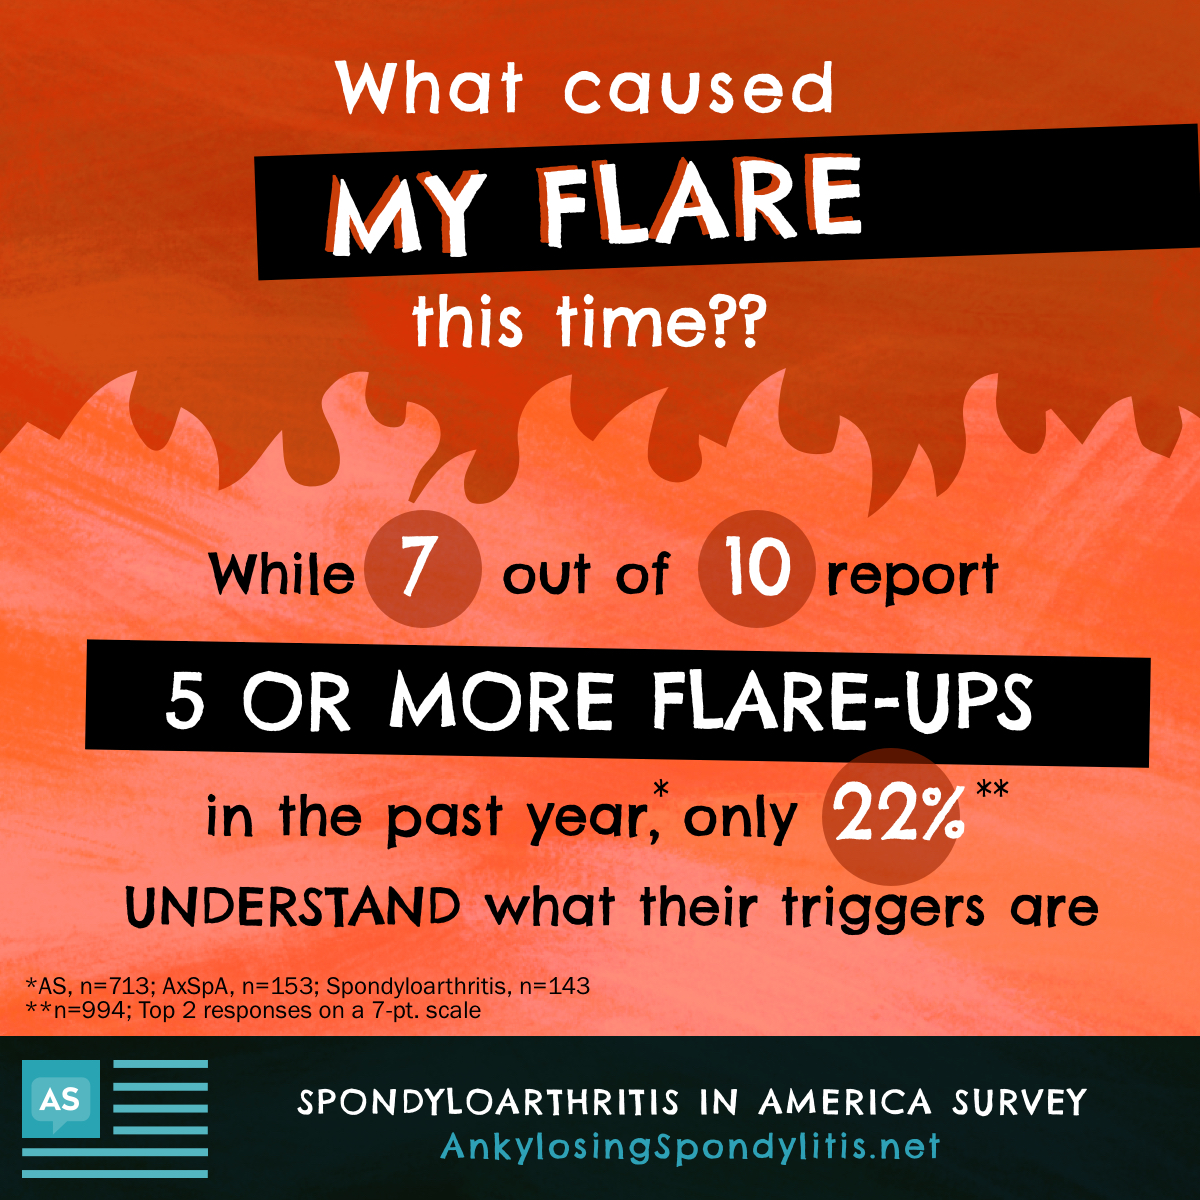 Background is flames. What caused my flare this time? While 7 out of 10 reported having 5 or more flare-ups in the past year, only 22% understand what their triggers are (n=994)